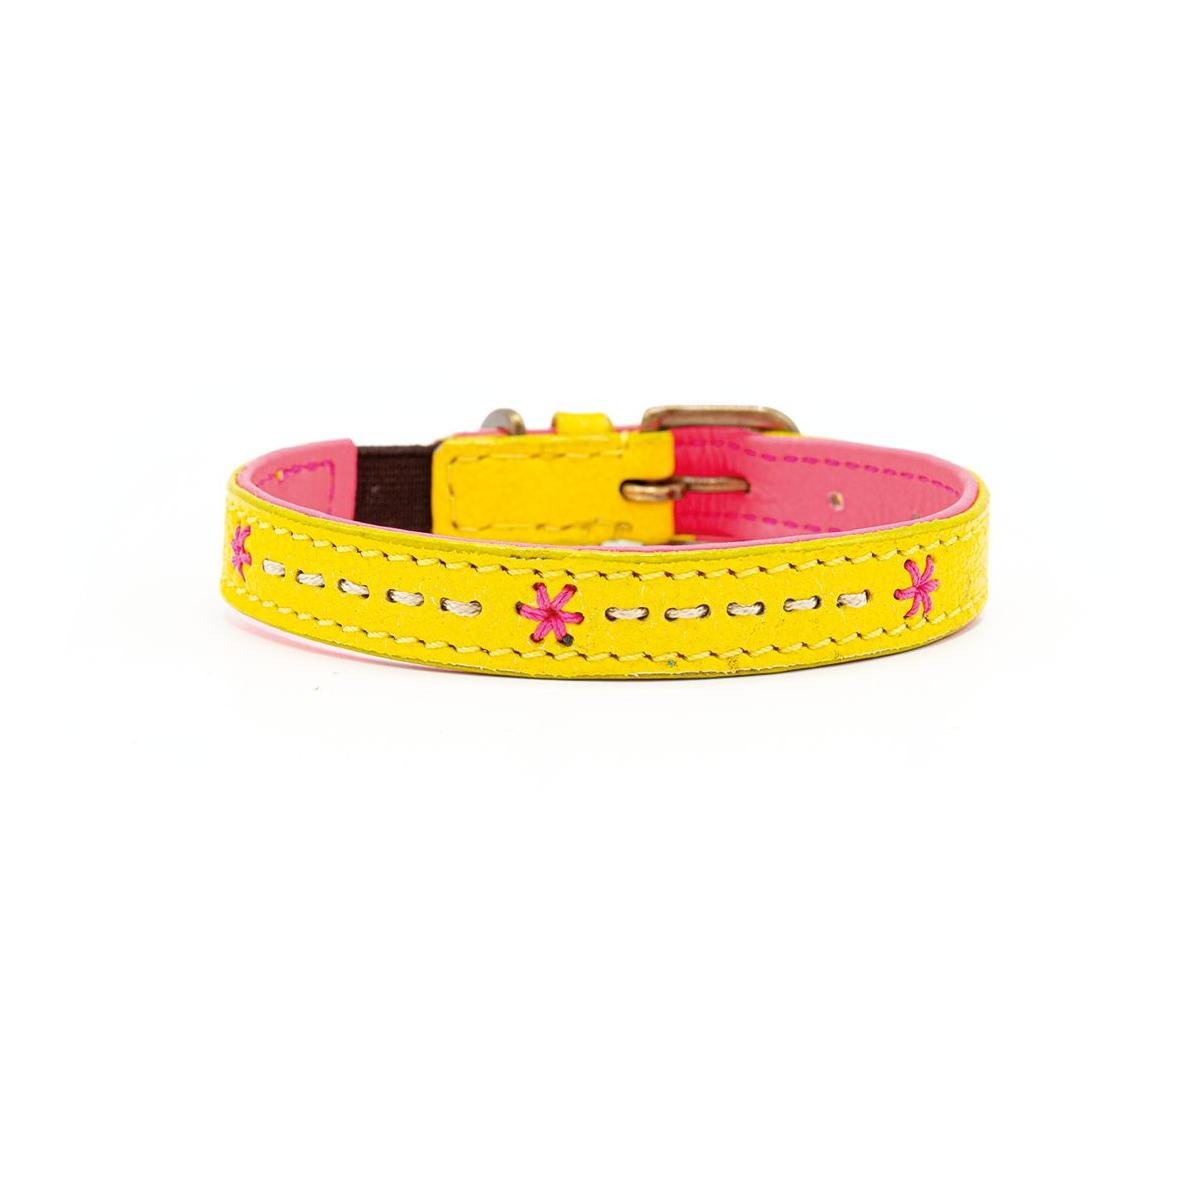 Image of Dog with a mission Ollie Katzenhalsband - Gelb, Rosa / Pink, Multi - bei Hauptner.ch